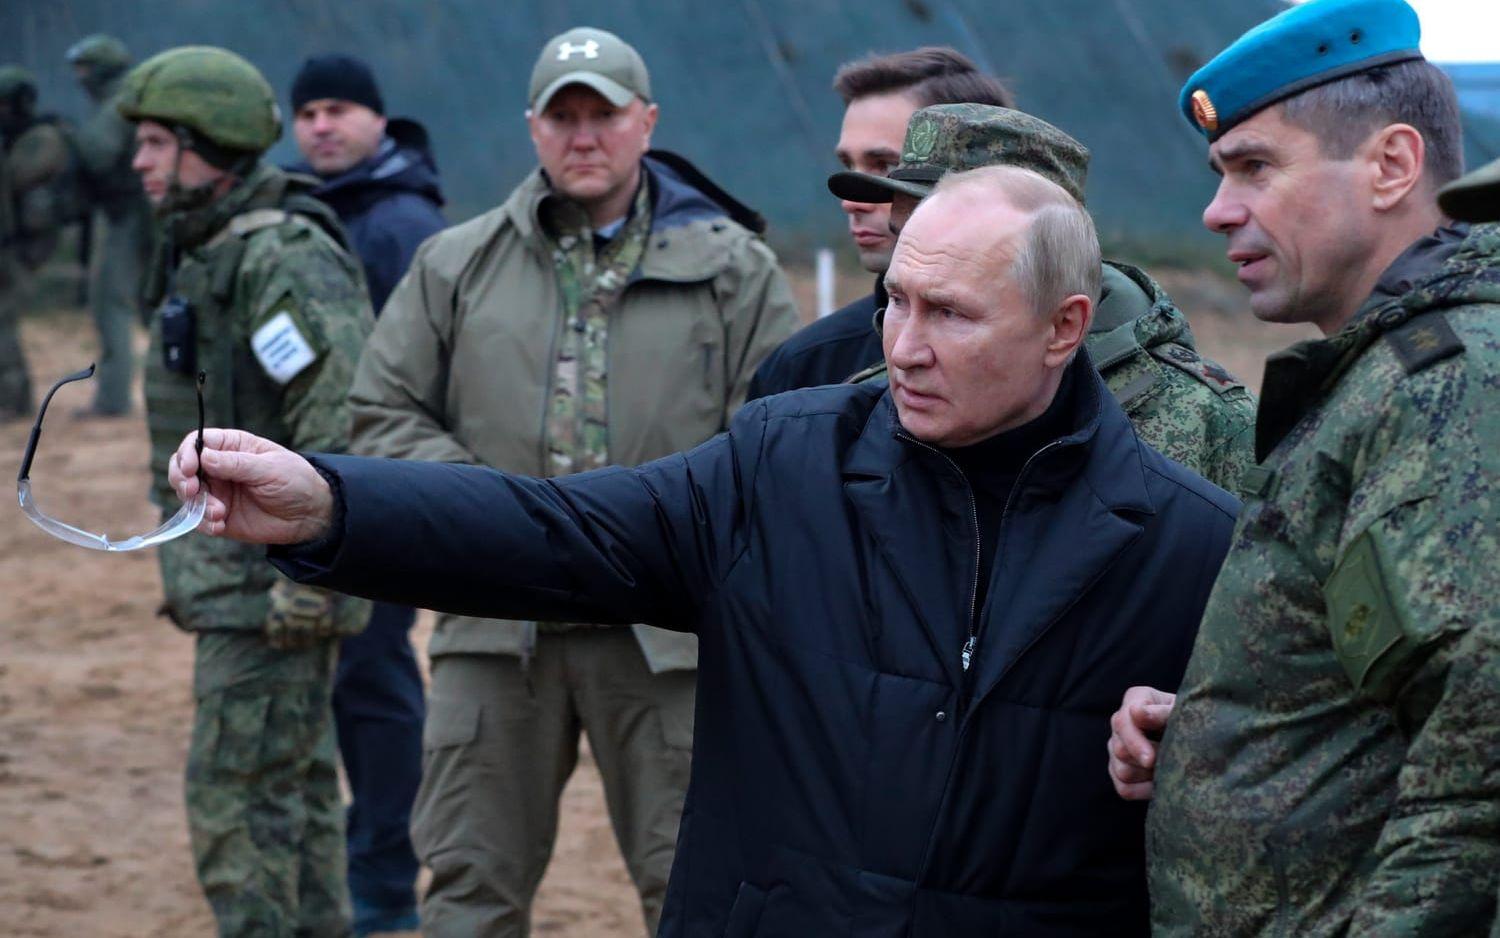 FILE - Russian President Vladimir Putin, second right, gestures as he visits with Deputy Commander of the Airborne Troops Anatoly Kontsevoy, right, a military training centre of the Western Military District for mobilised reservists in Ryazan Region, Russia, on Oct. 20, 2022. Moscow after a string of battlefield defeats and other setbacks, further cornering Russian President Vladimir Putin and setting the stage for an escalation. Ukrainian forces pressing an offensive in the south have zeroed in on Kherson, a provincial capital that has been under Russian control since the early days of the invasion. (Mikhail Klimentyev, Sputnik, Kremlin Pool Photo via AP, File)  XPB911